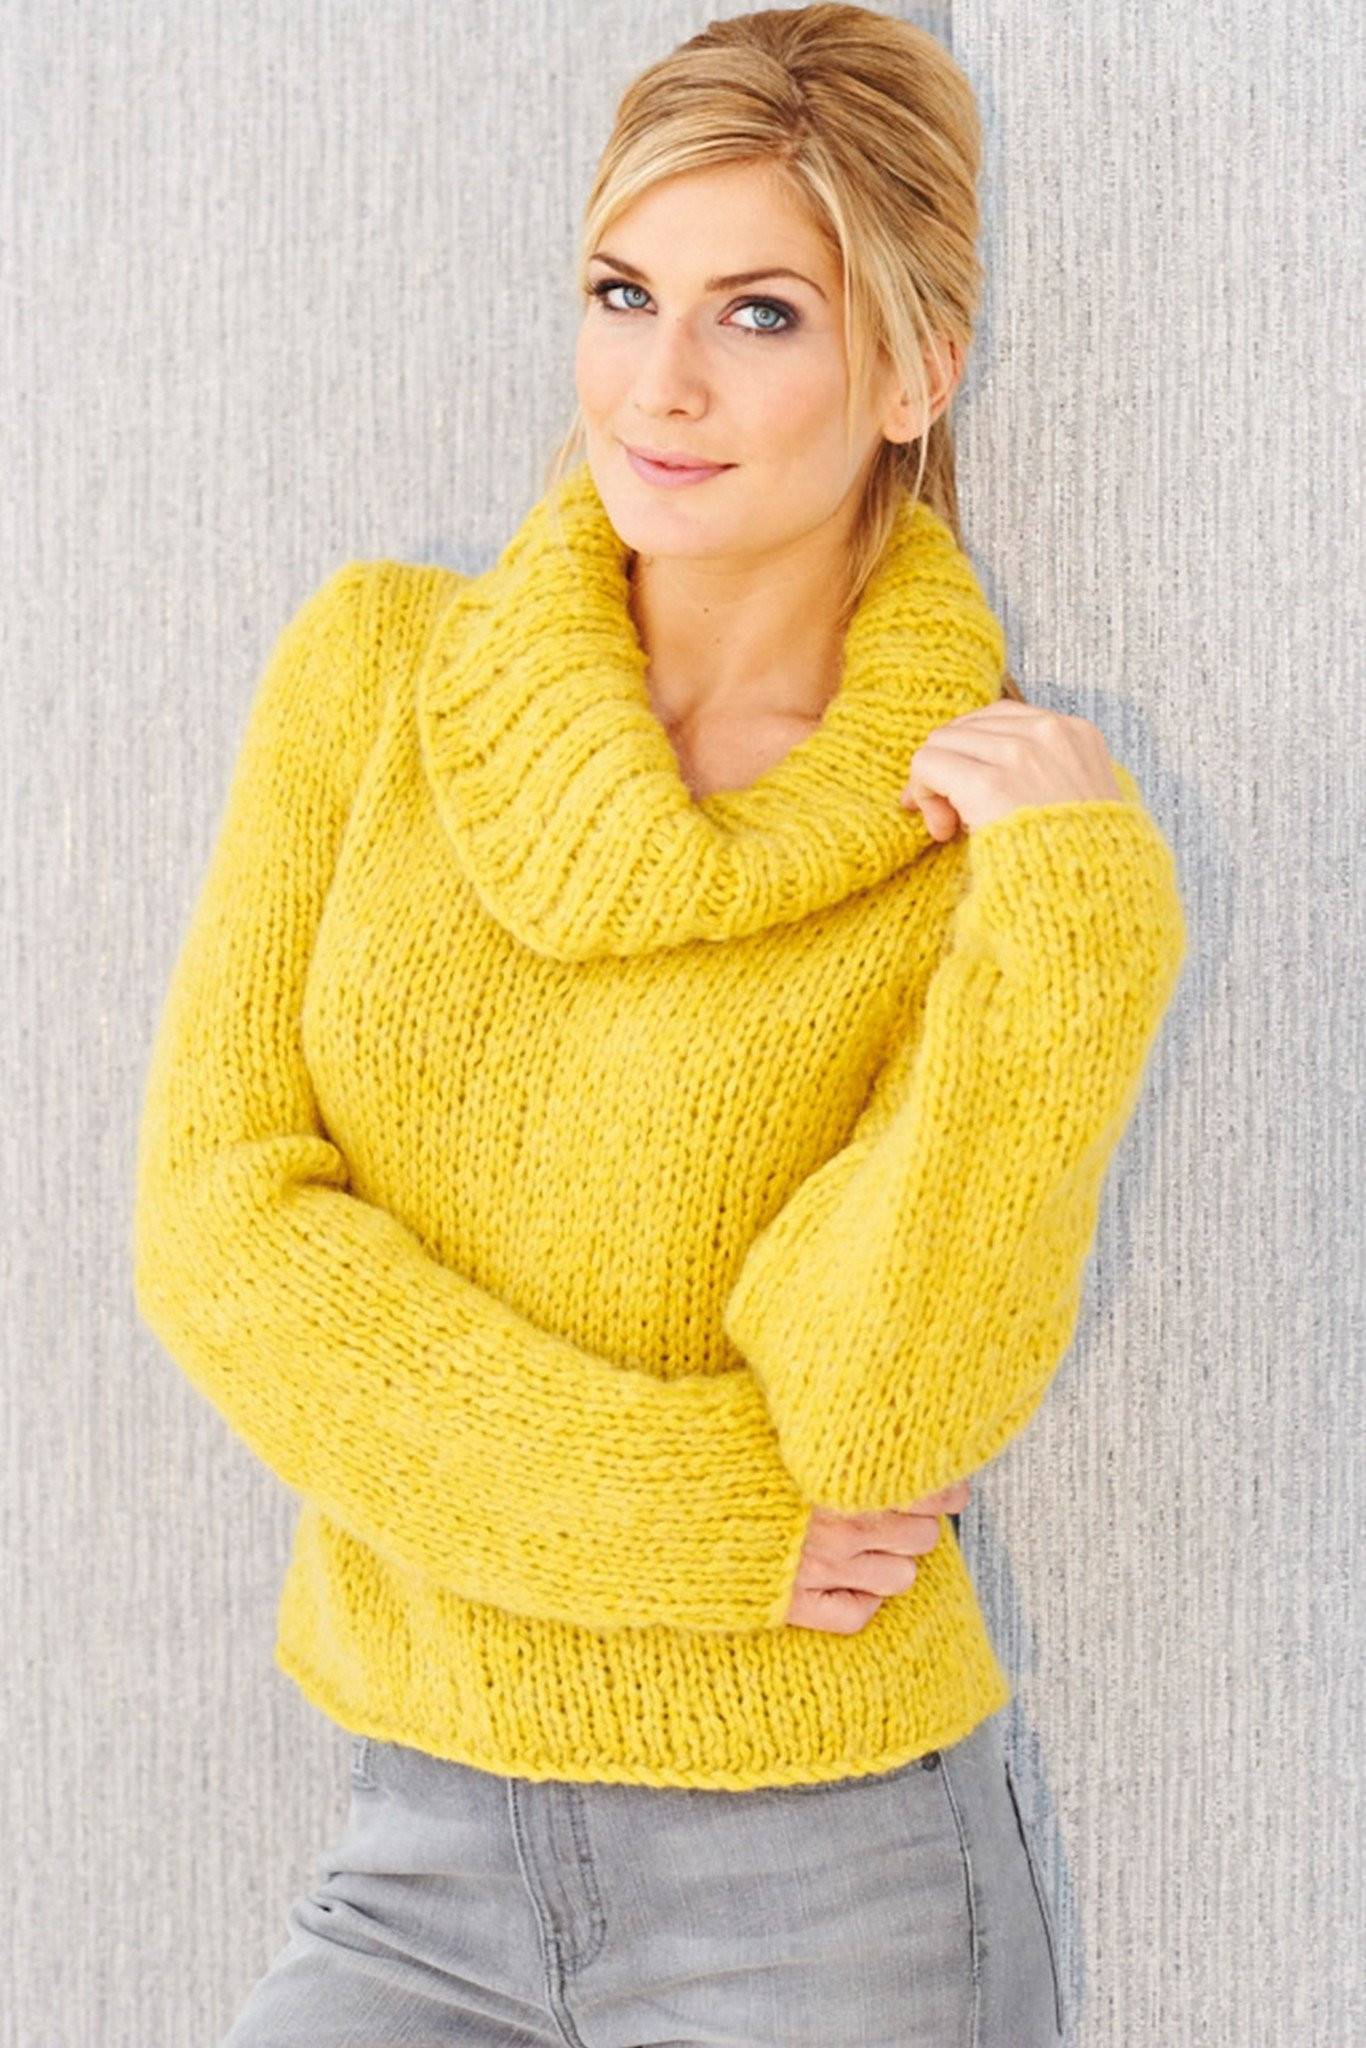 Cowl Neck Sweater Knitting Pattern | vlr.eng.br